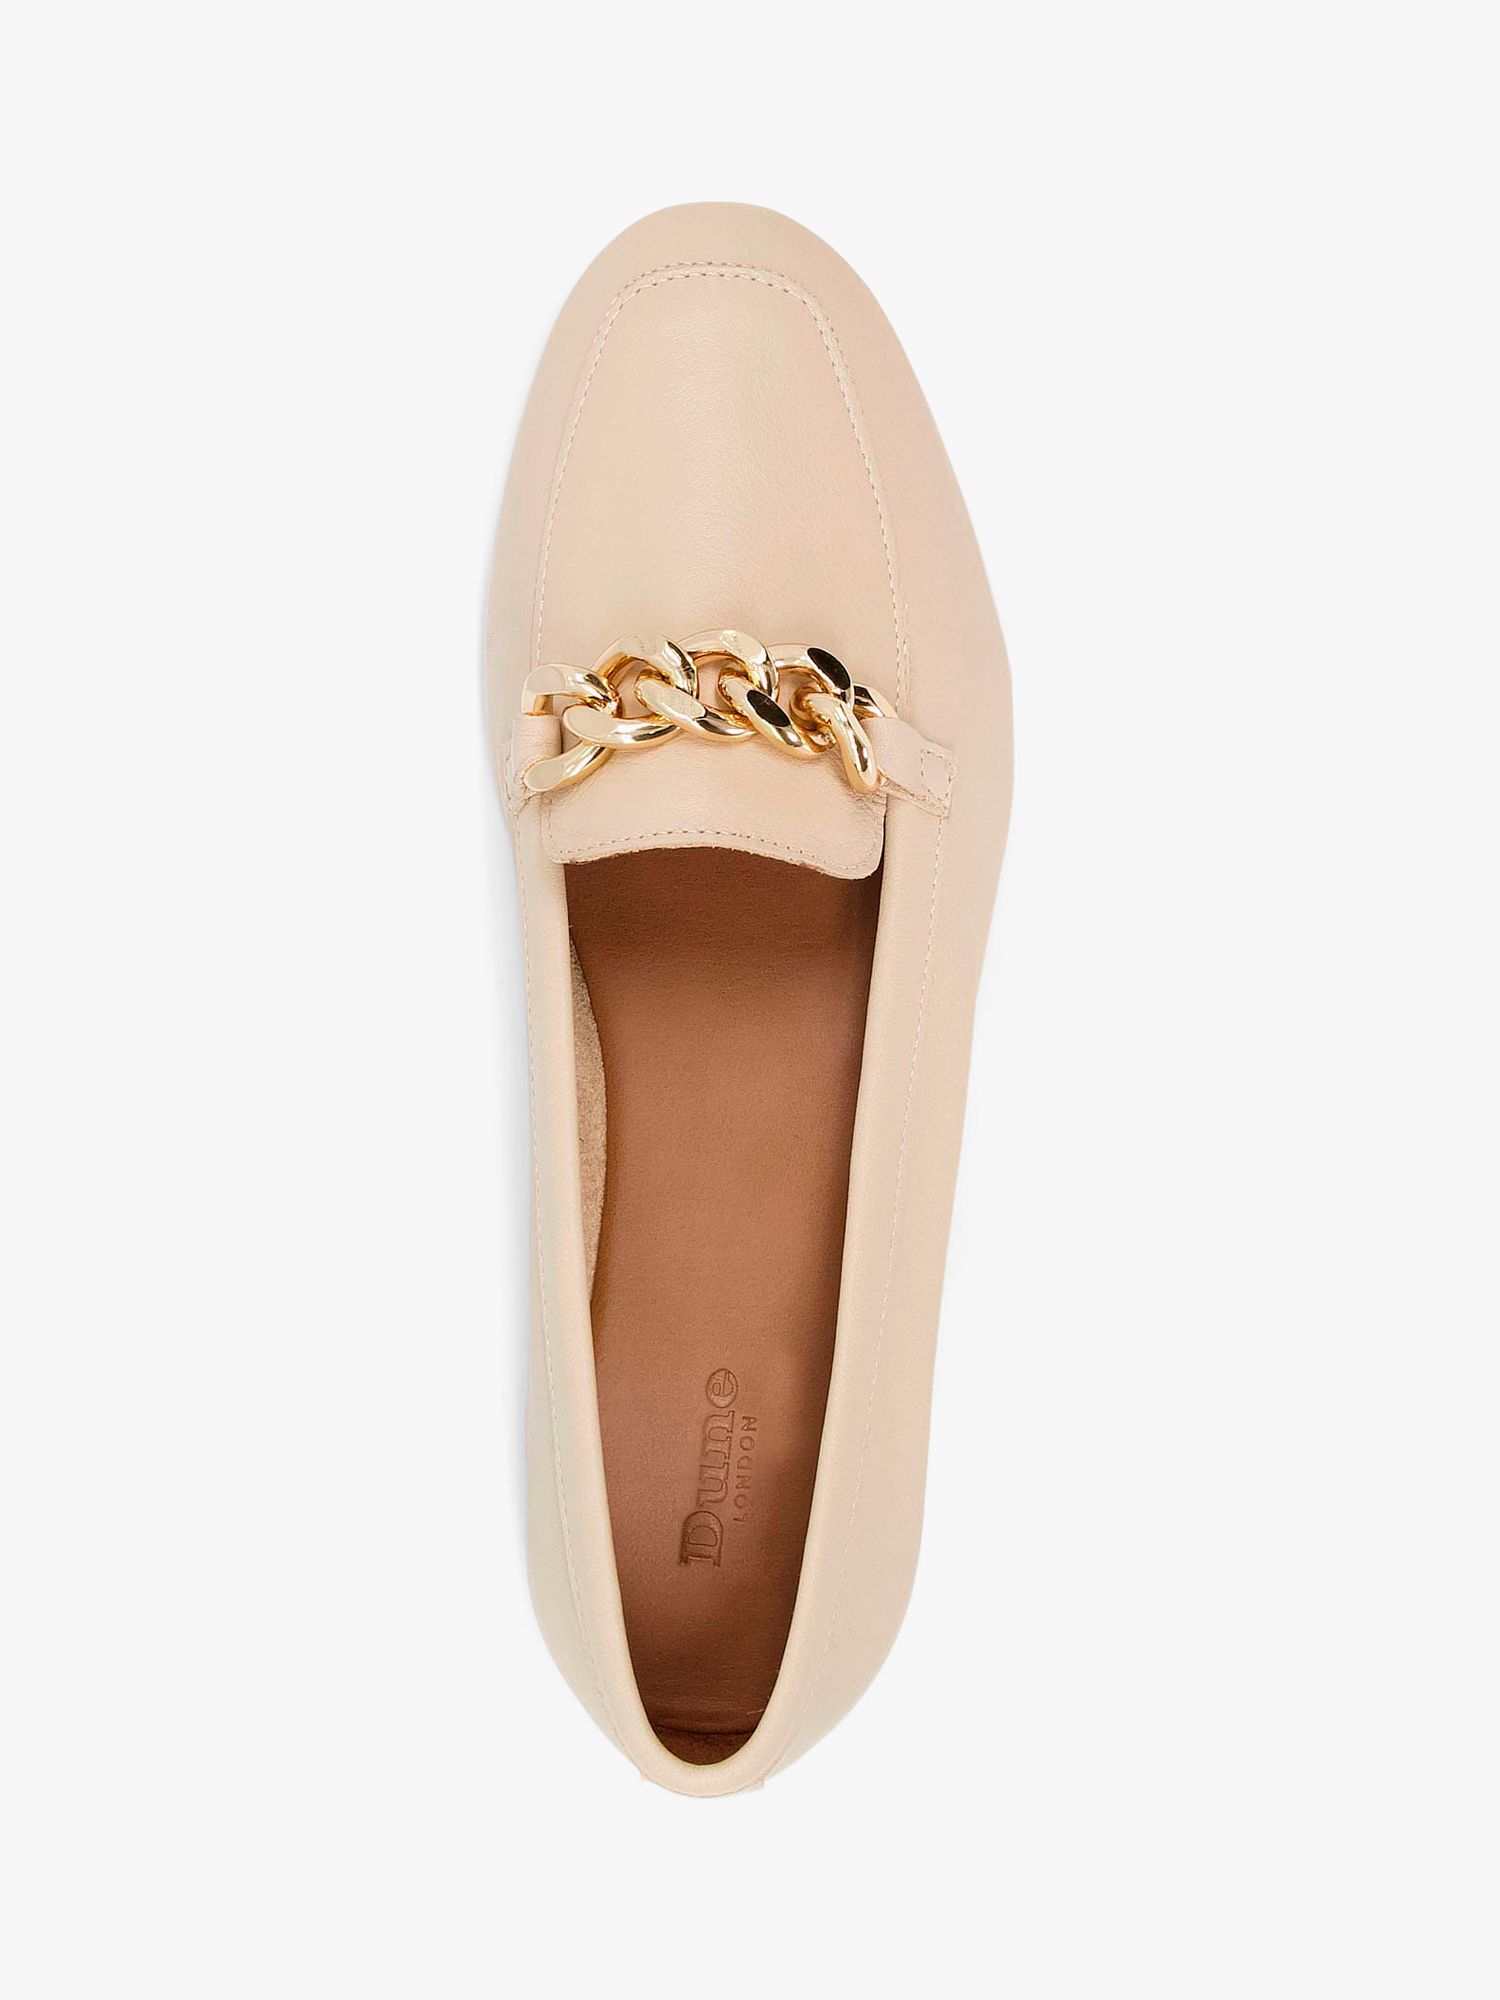 Dune Goldsmith Leather Chain Detail Loafers, Ecru at John Lewis & Partners